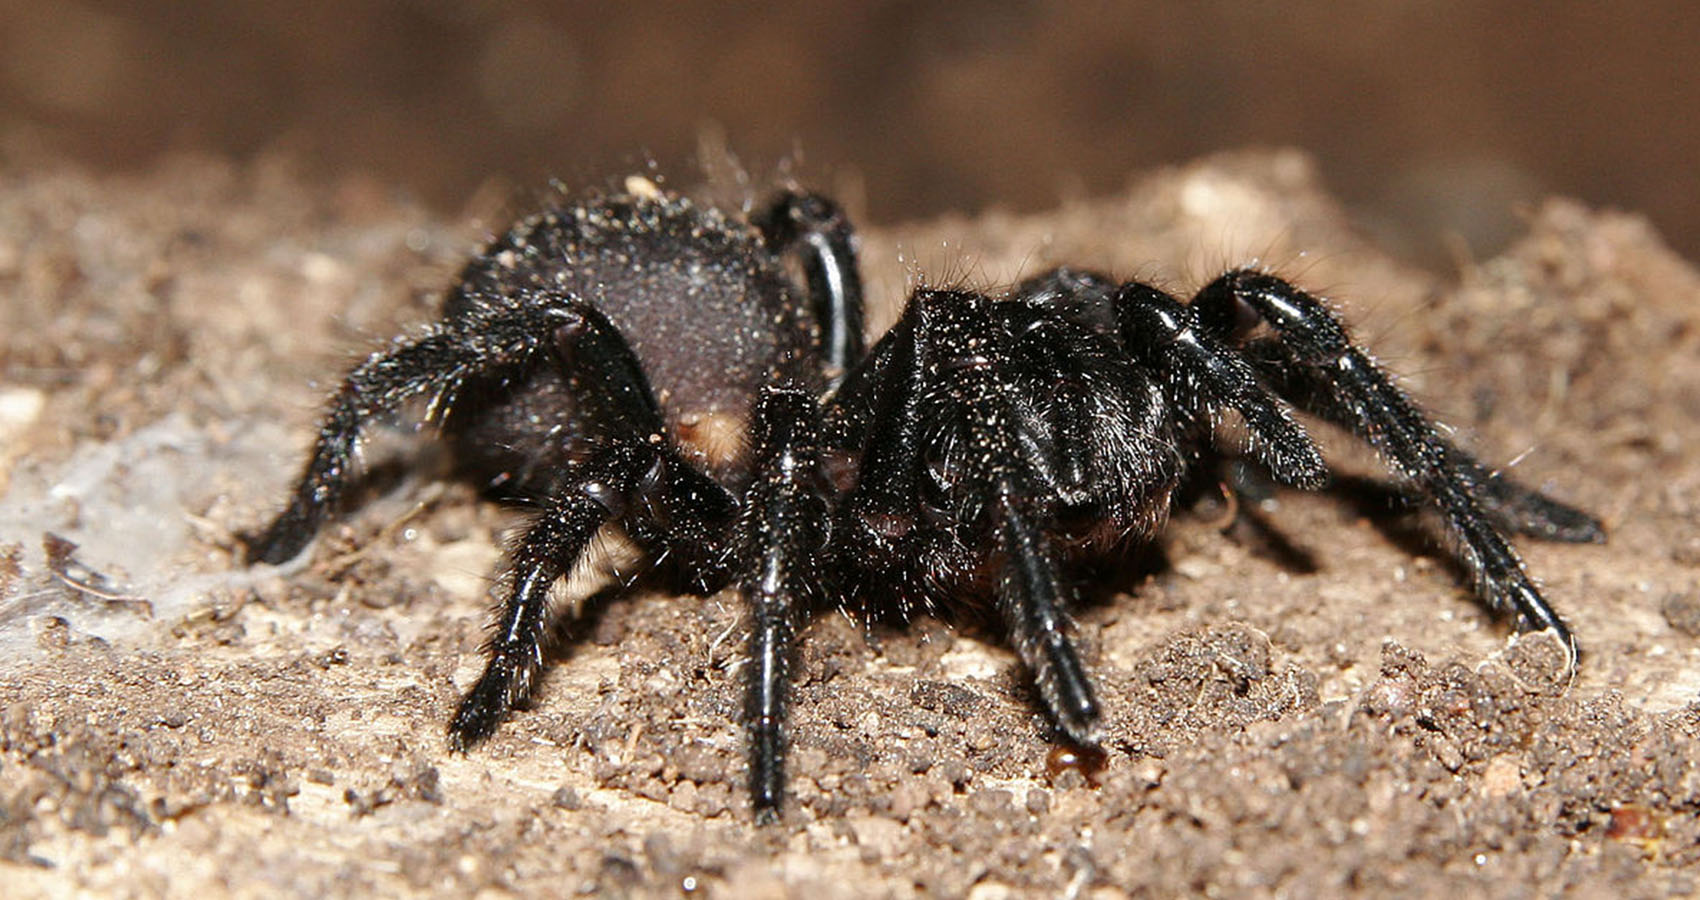 hard to believe facts --  The Australian Funnel Web Spider is often regarded as the world's deadliest and hasn't had a confirmed kill in over 40 years since the antivenom was created.